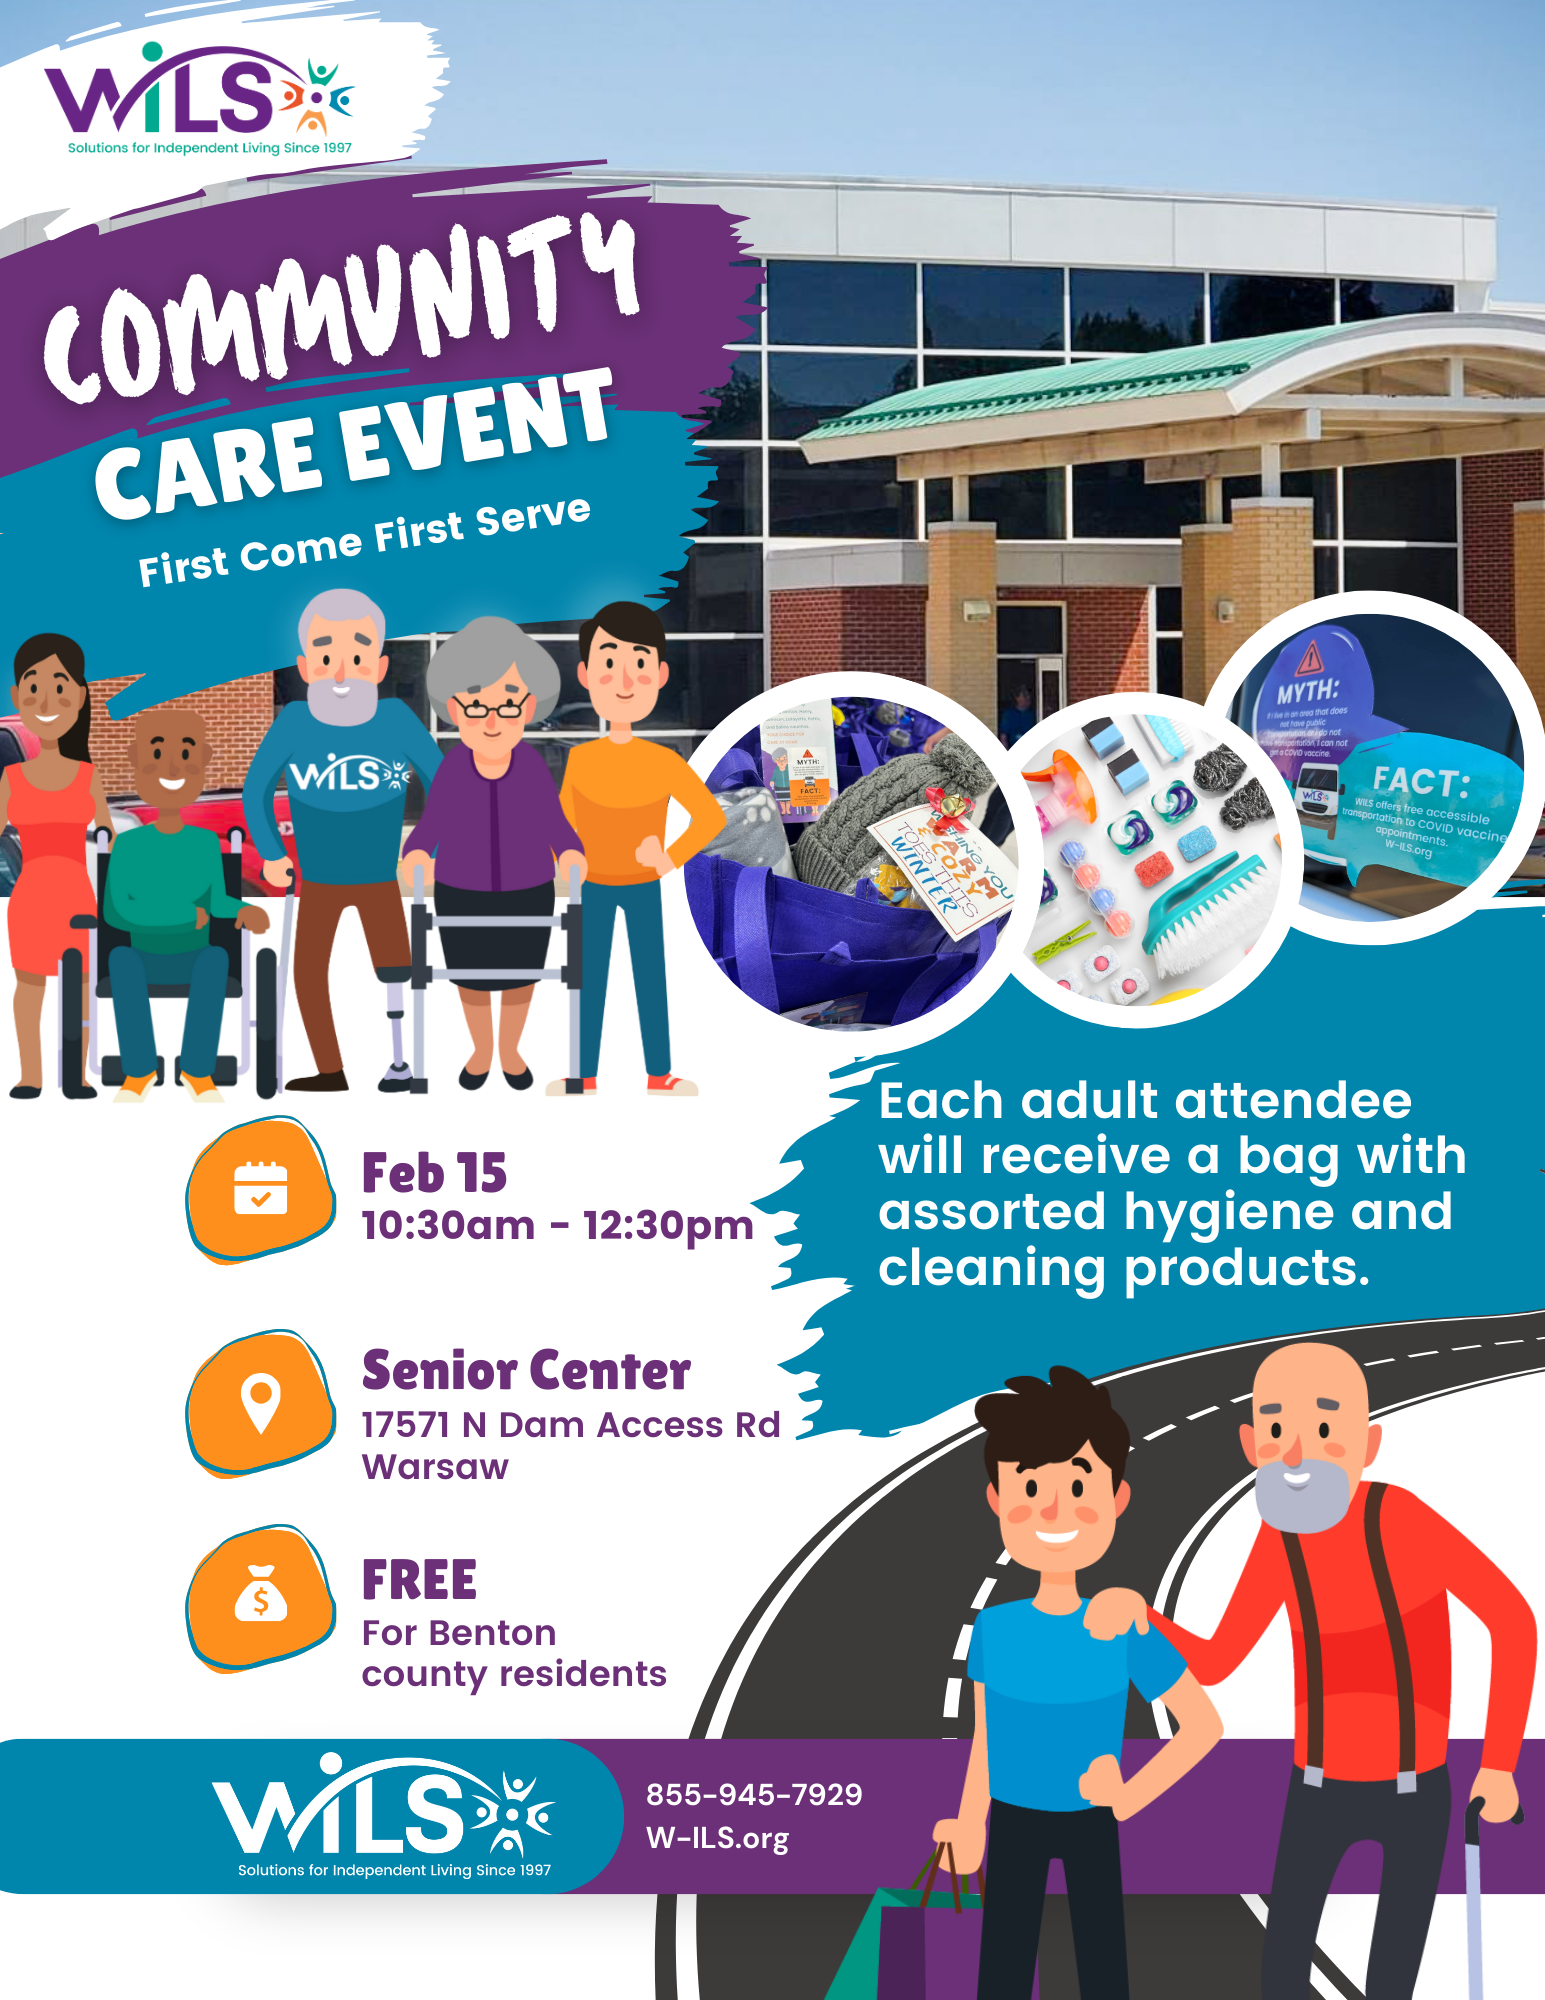 Free Community
Care Event
Feb 15
10:30am - 12:30pm
Senior Center
17571 N Dam Access Rd 
Warsaw
For Benton 
county residents
Each adult attendee will receive a bag with assorted hygiene and cleaning products.
855-945-7929
W-ILS.org
